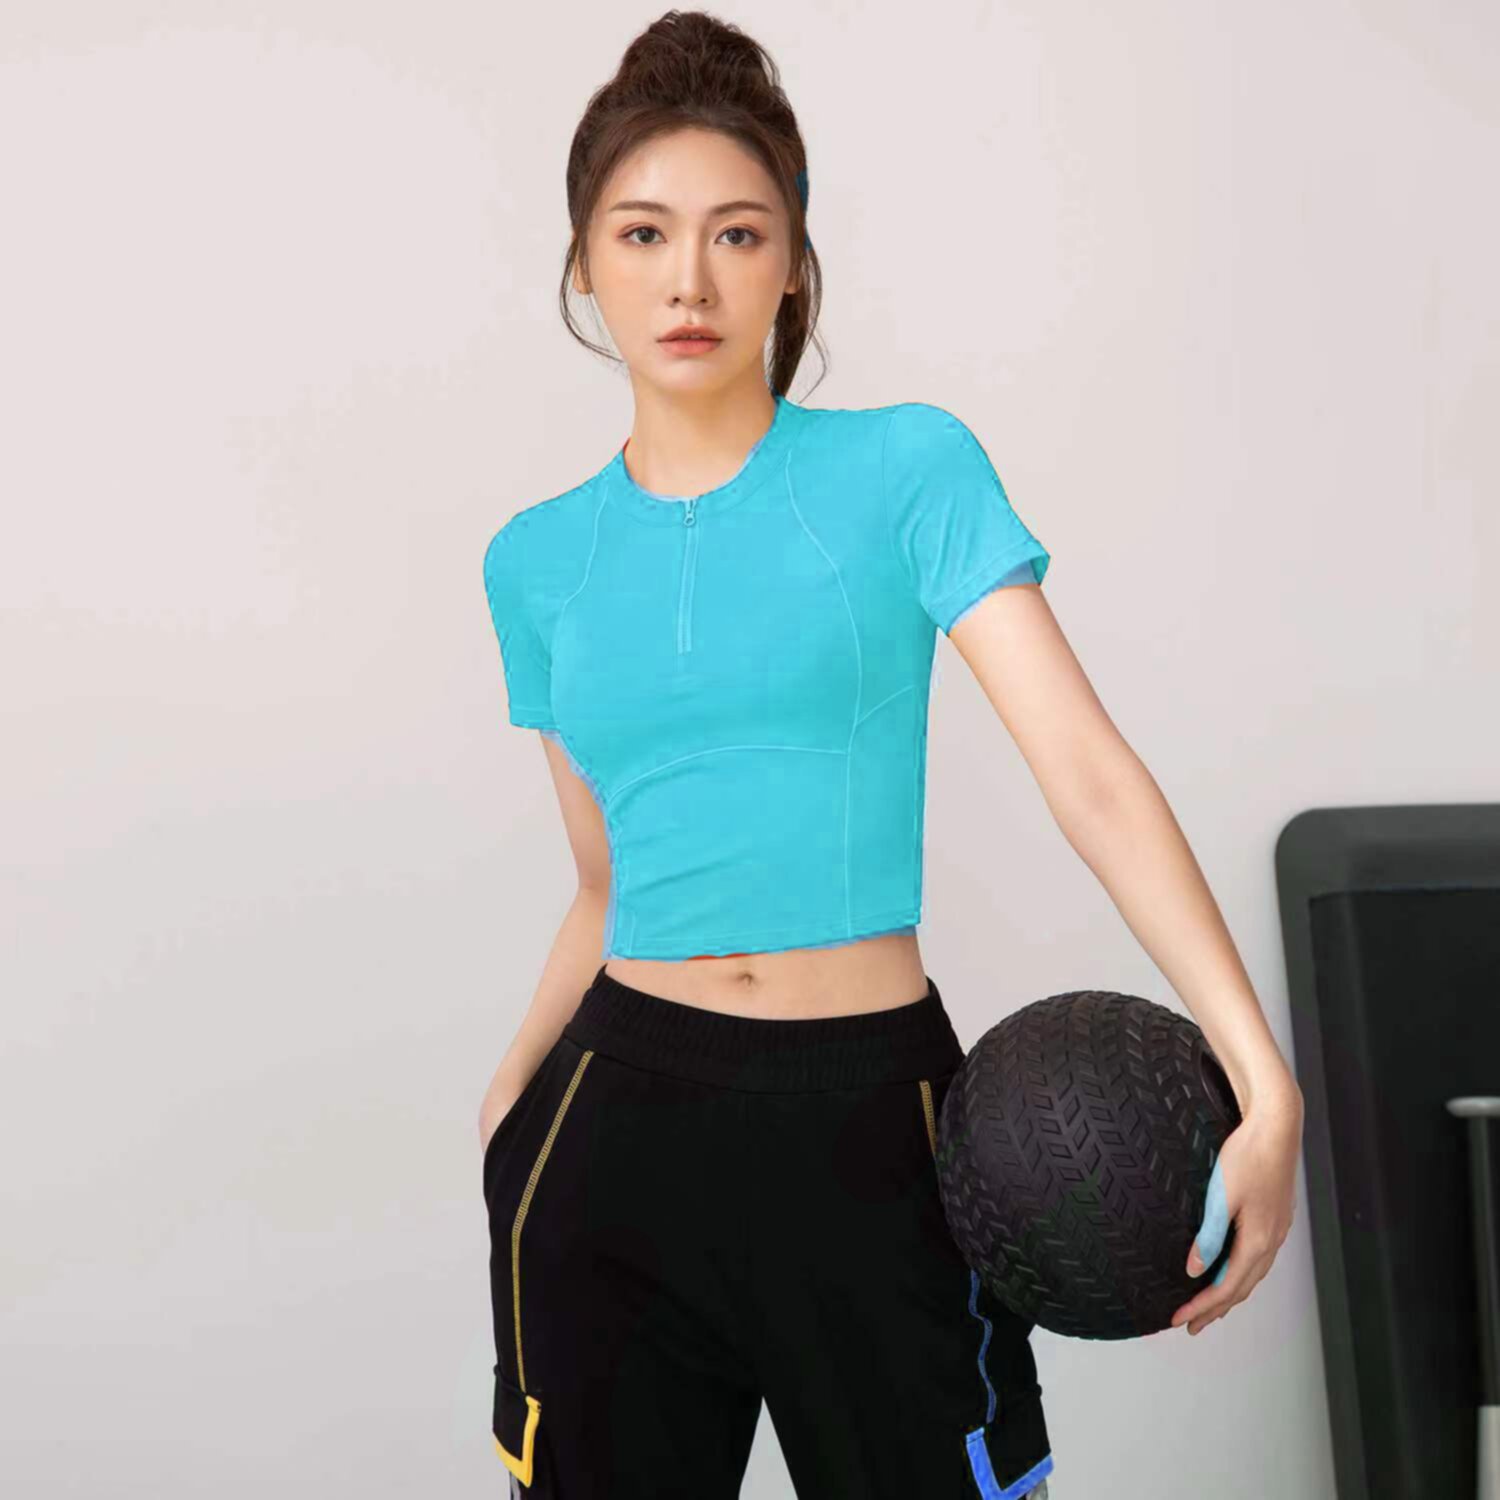 Short half-zip sports sleeve with exposed navel